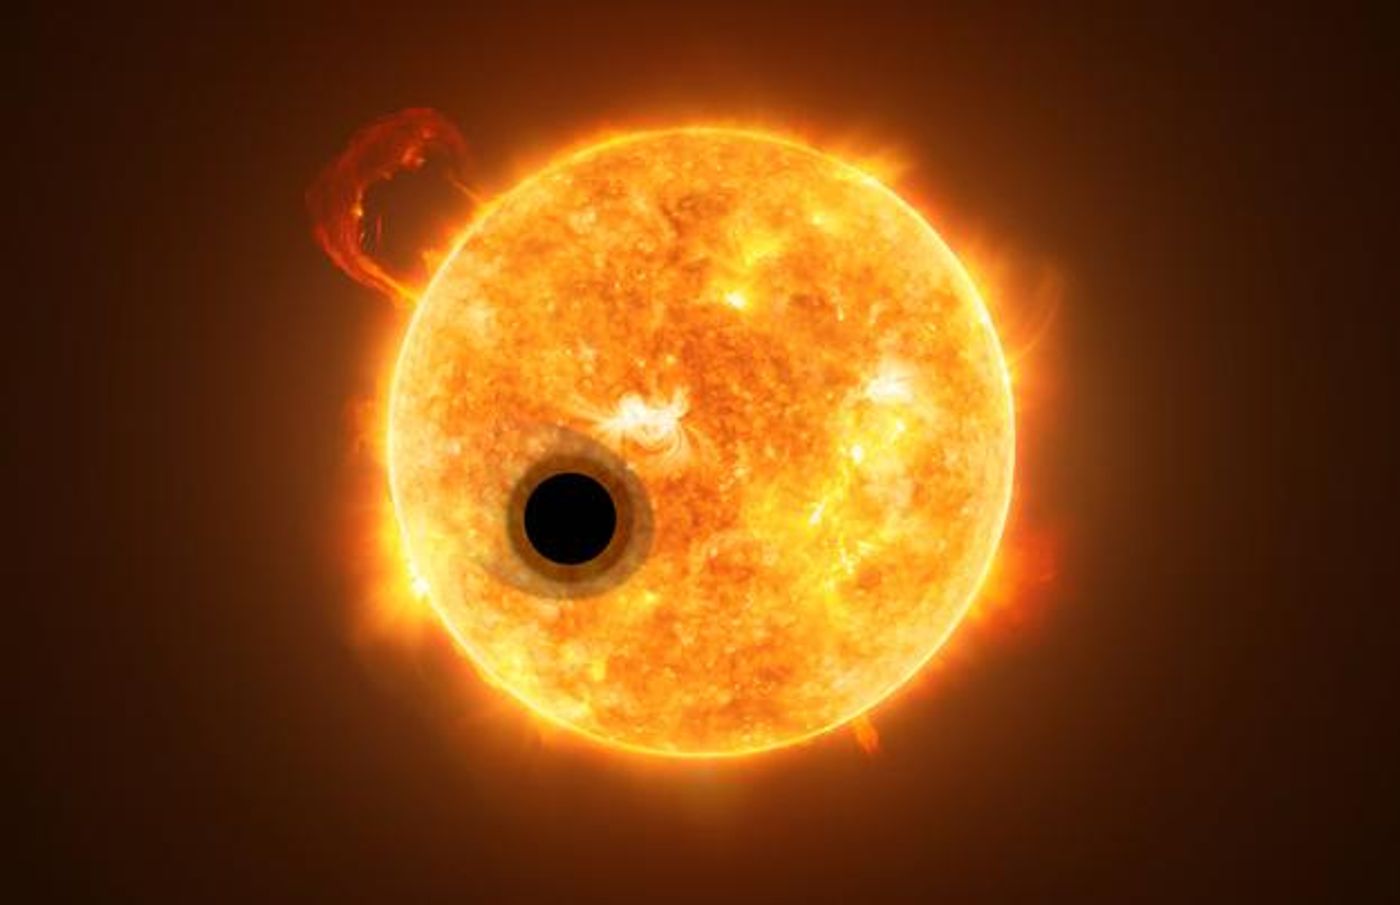 Artistic rendition of the exoplanet WASP-107b and its star, WASP-107. Some of the star's light streams through the exoplanet's extended gas layer. / Credit:  ESA/Hubble, NASA, M. Kornmesser.